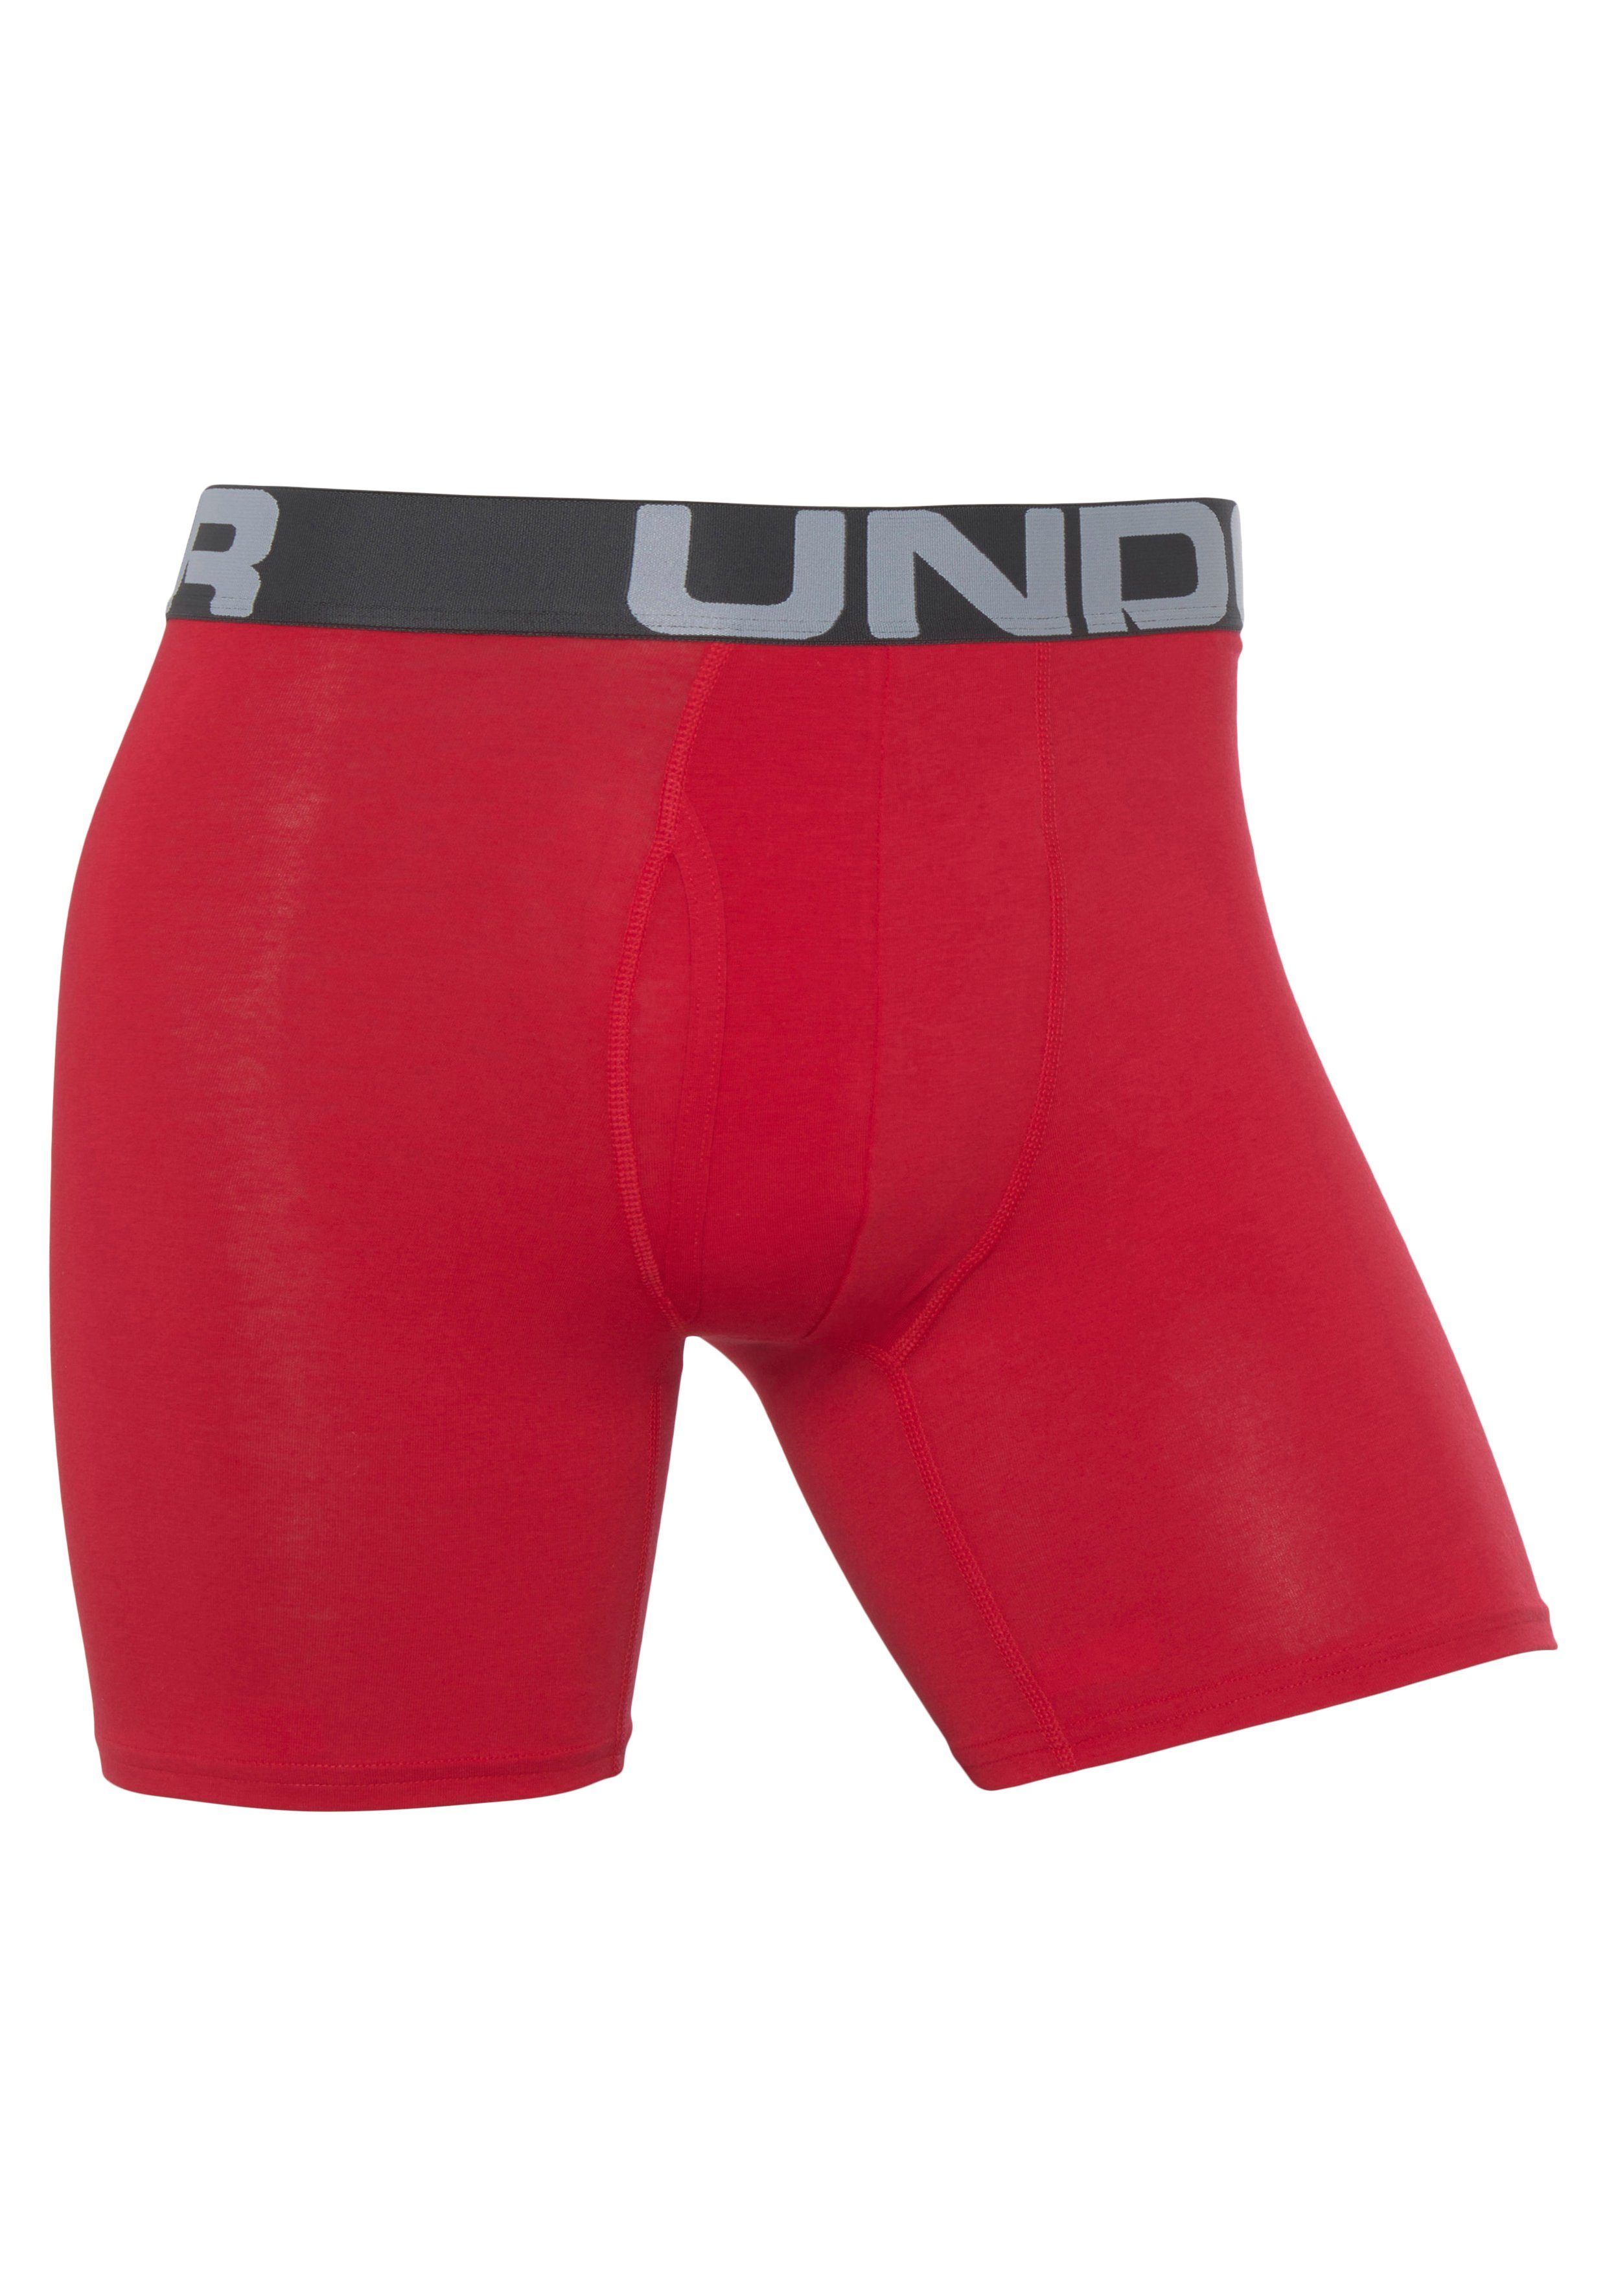 Under Armour® Boxershorts 1 CHARGED in 600 COTTON 6 Red PACK 3er-Pack) 3-St., (Packung